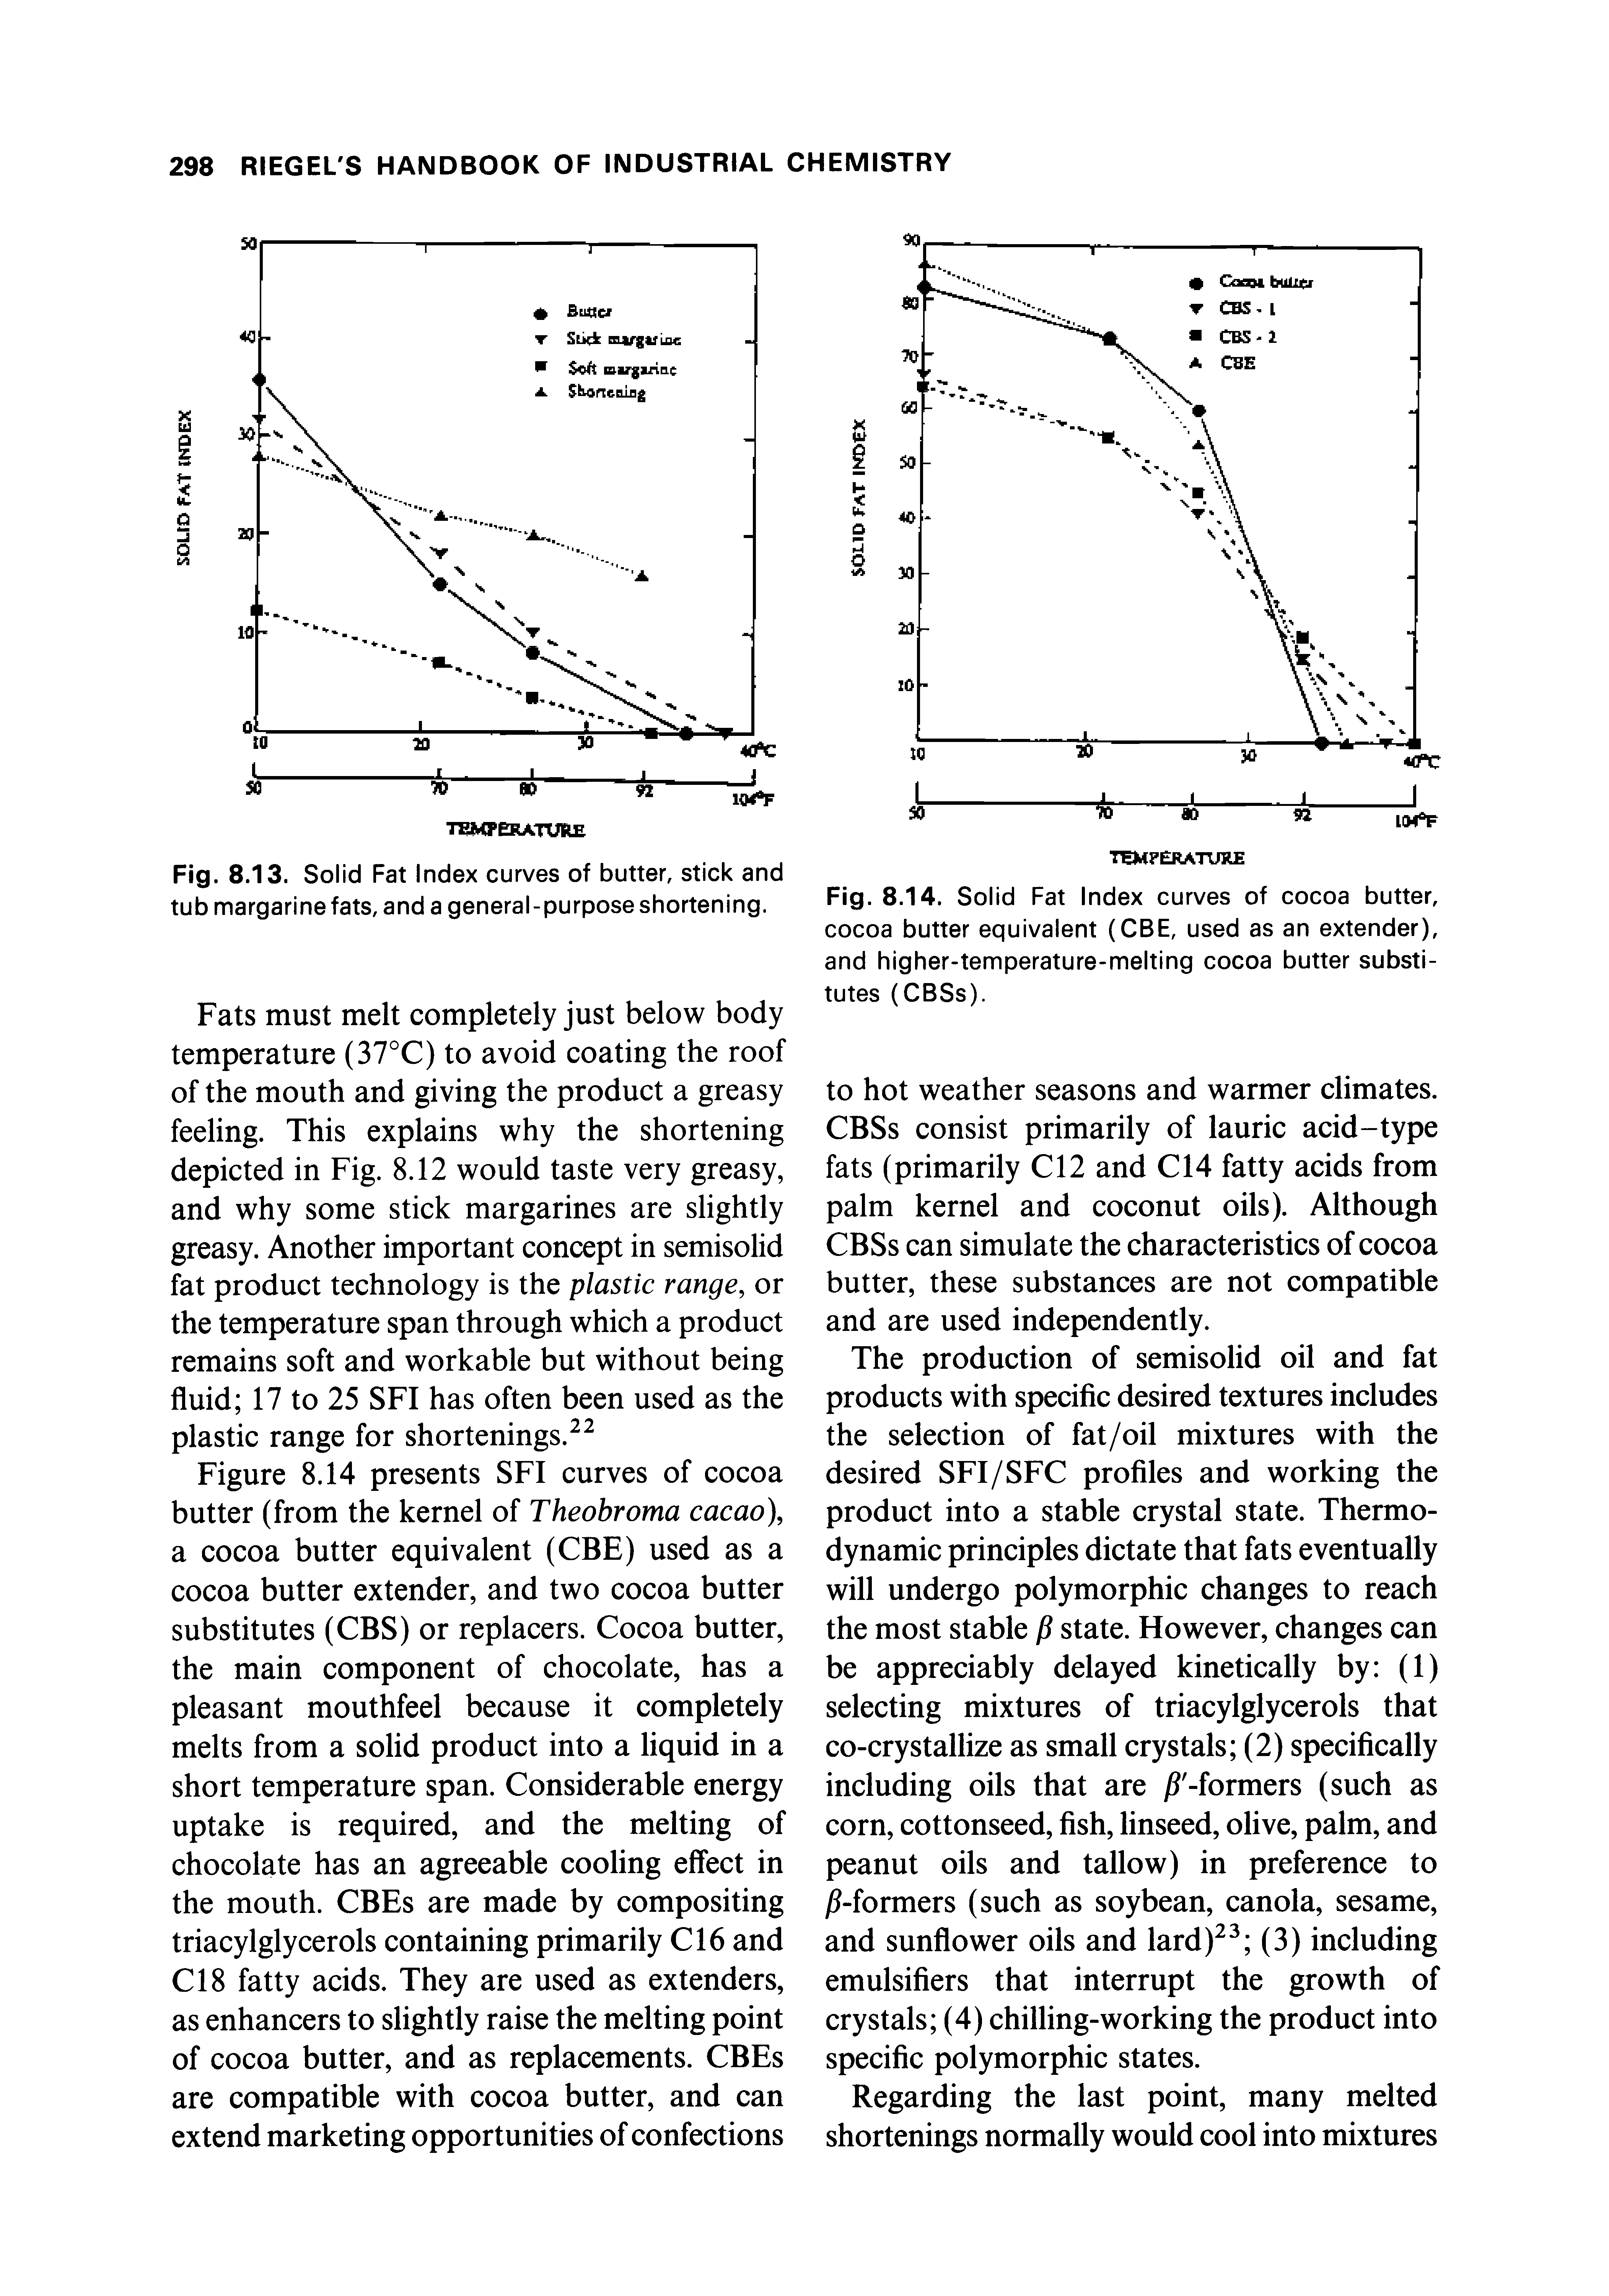 Fig. 8.13. Solid Fat Index curves of butter, stick and tub margarine fats, and a general-purpose shortening.